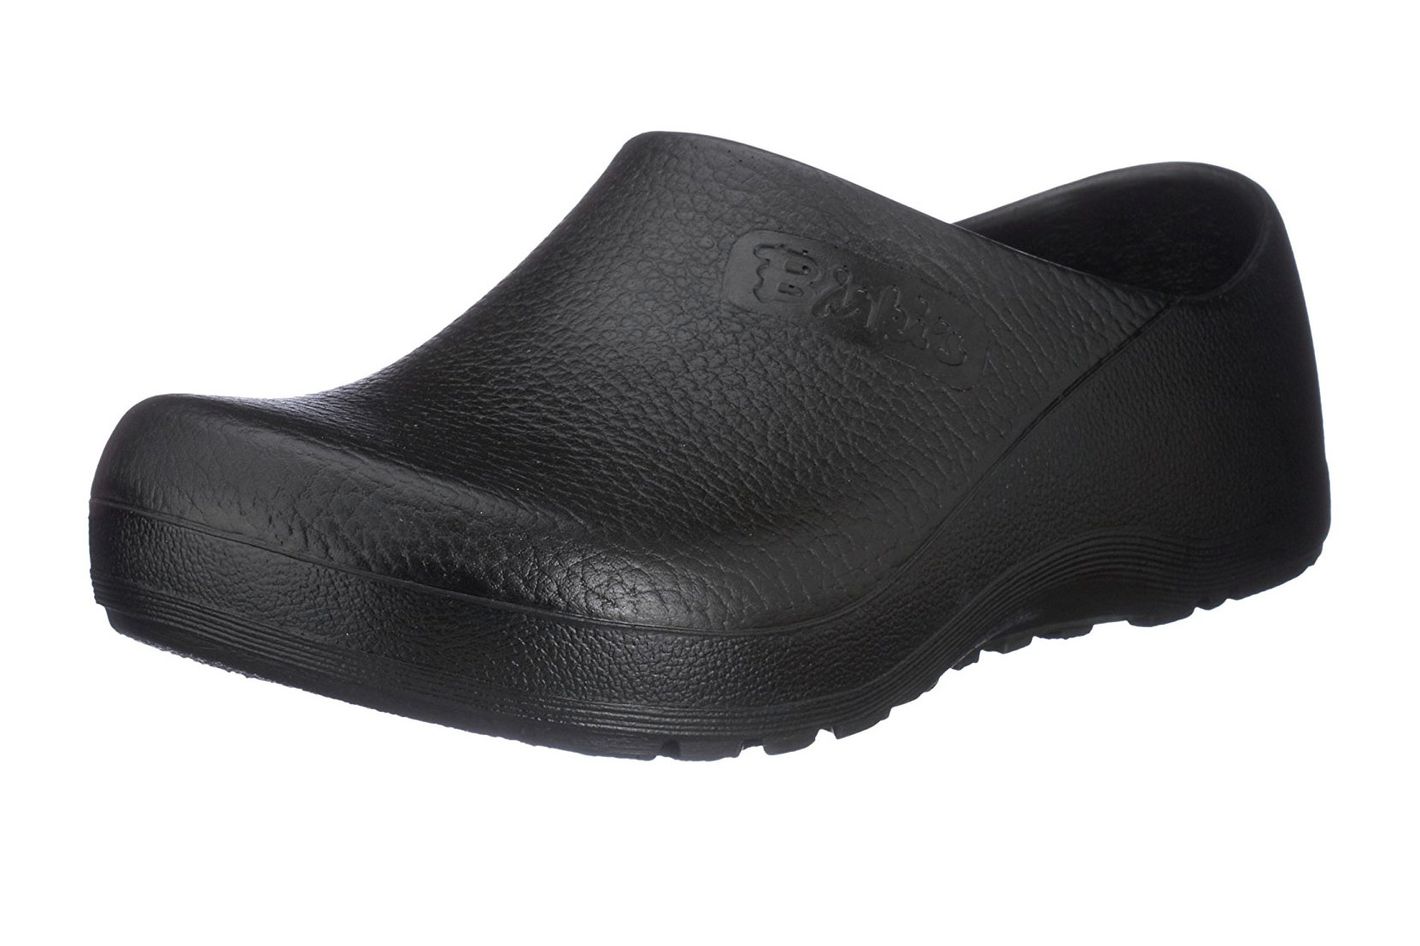 Buy > most comfortable shoes for summer > in stock